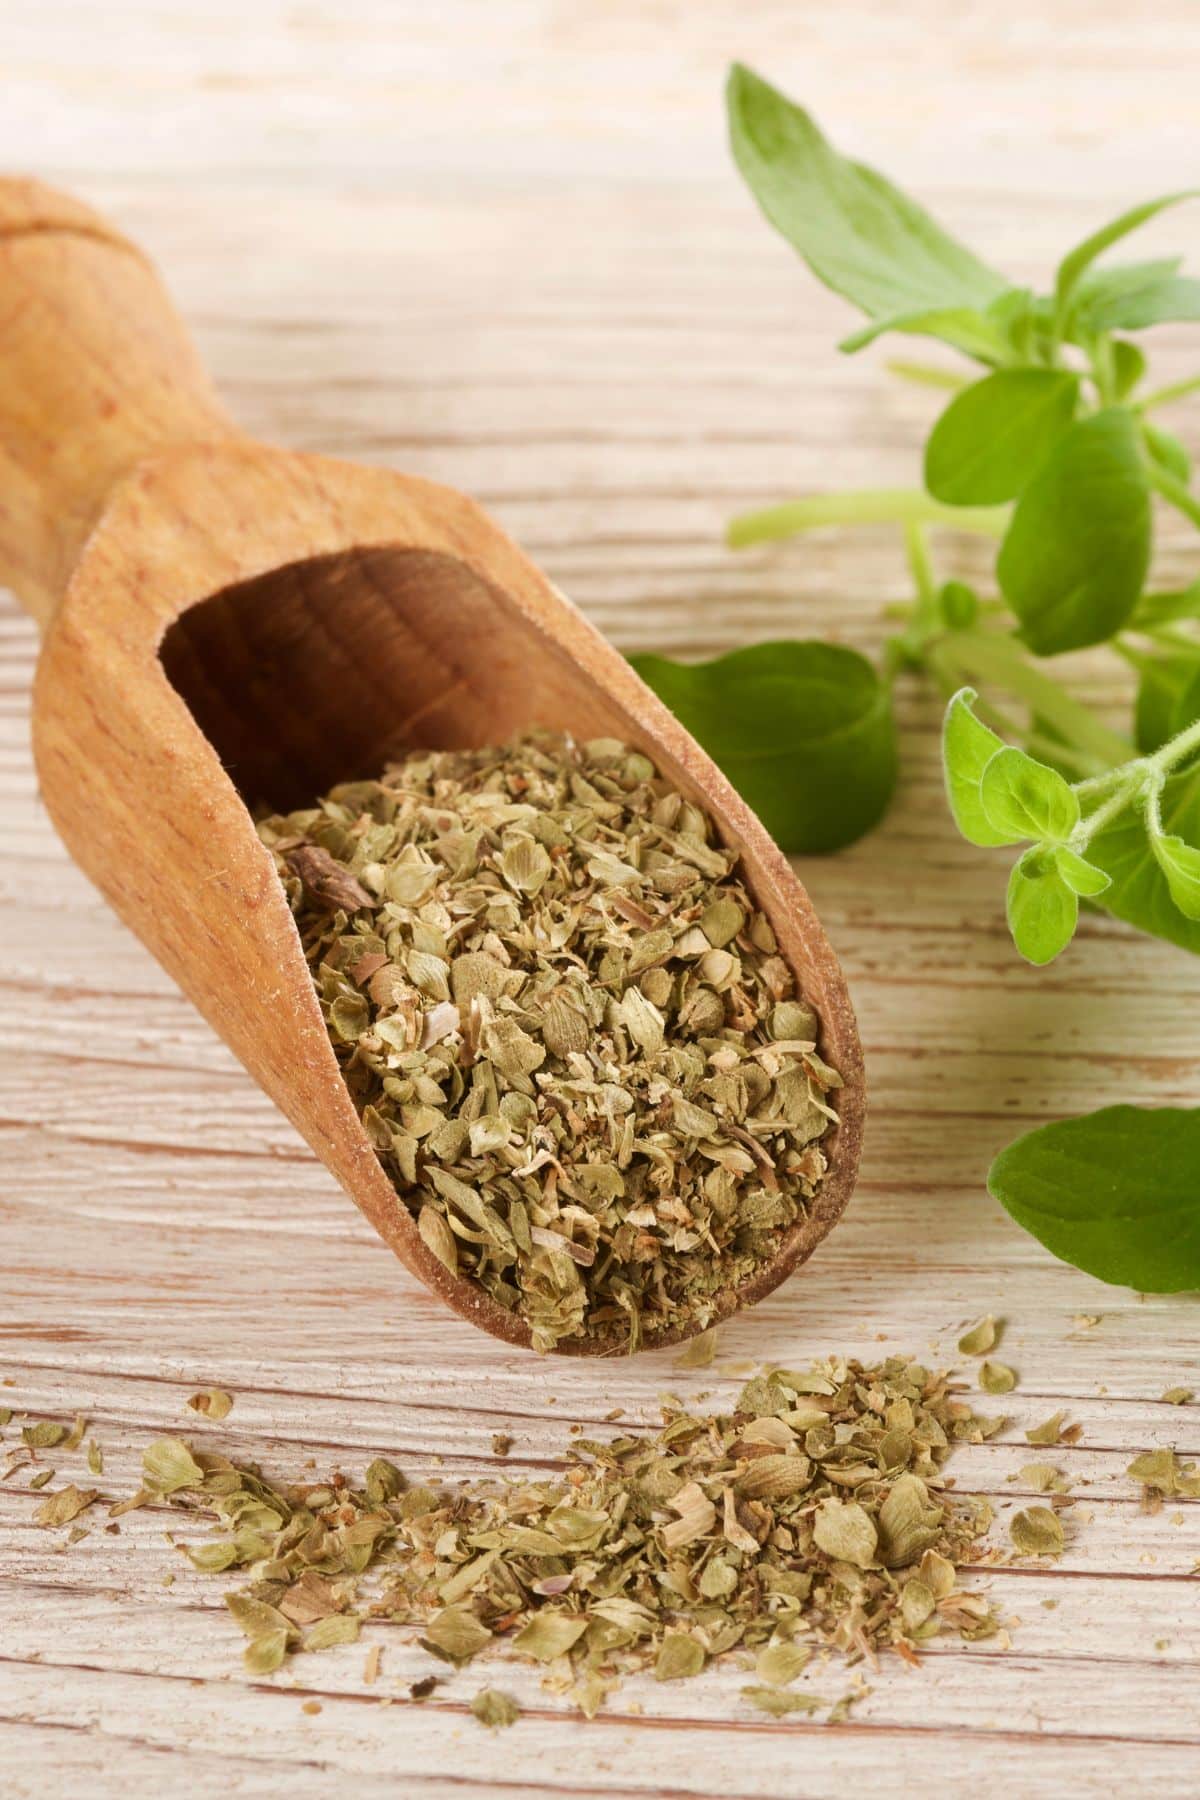 Dried oregano in scoop on wooden table with fresh oregano.